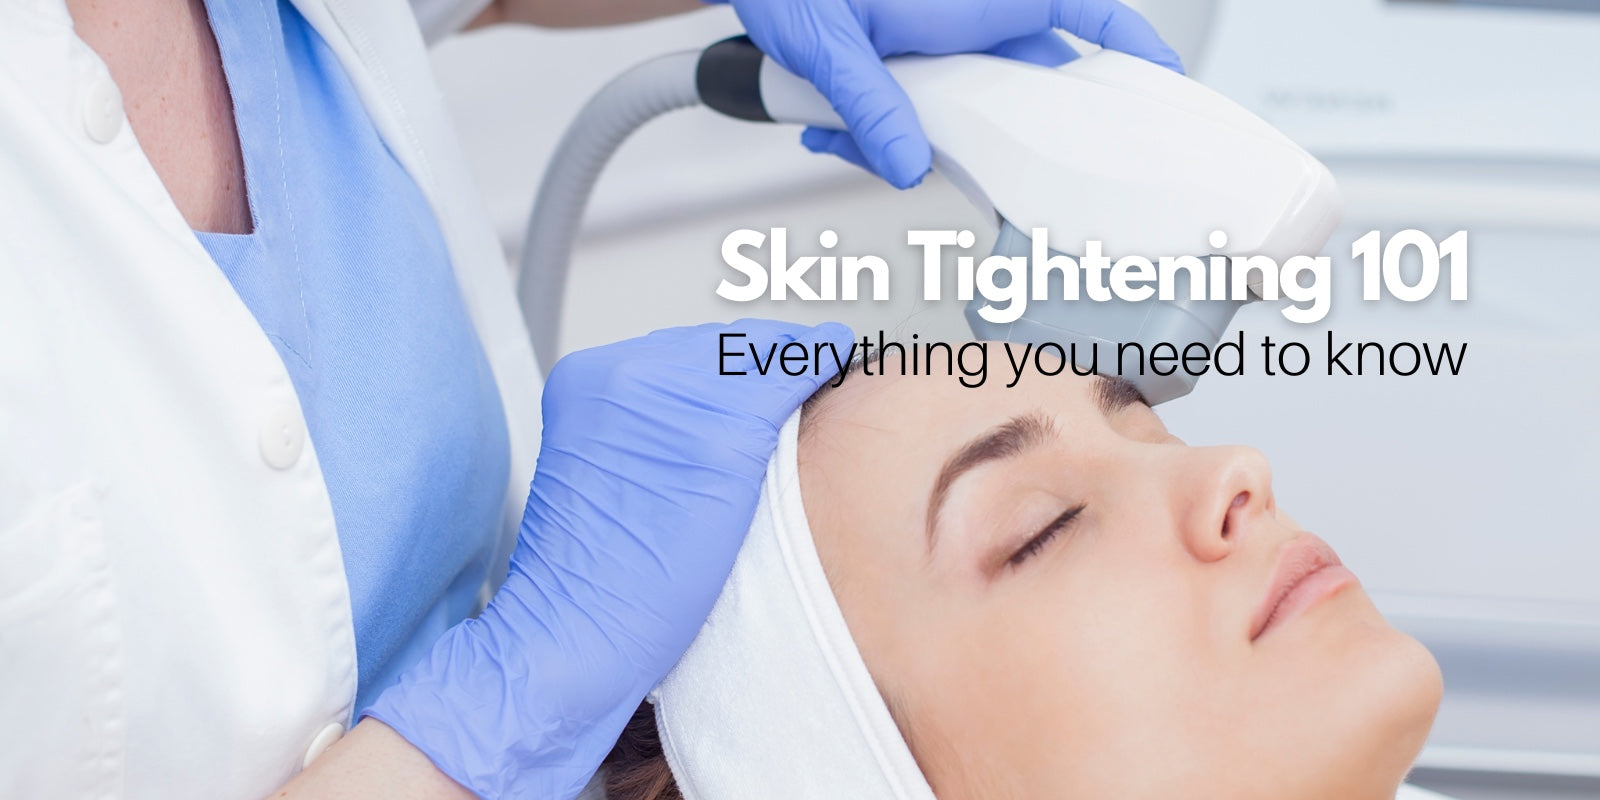 skin tightening, thermage, Fraxel, clear + brilliant, ultherapy, forma, Venus legacy. Victoria BC